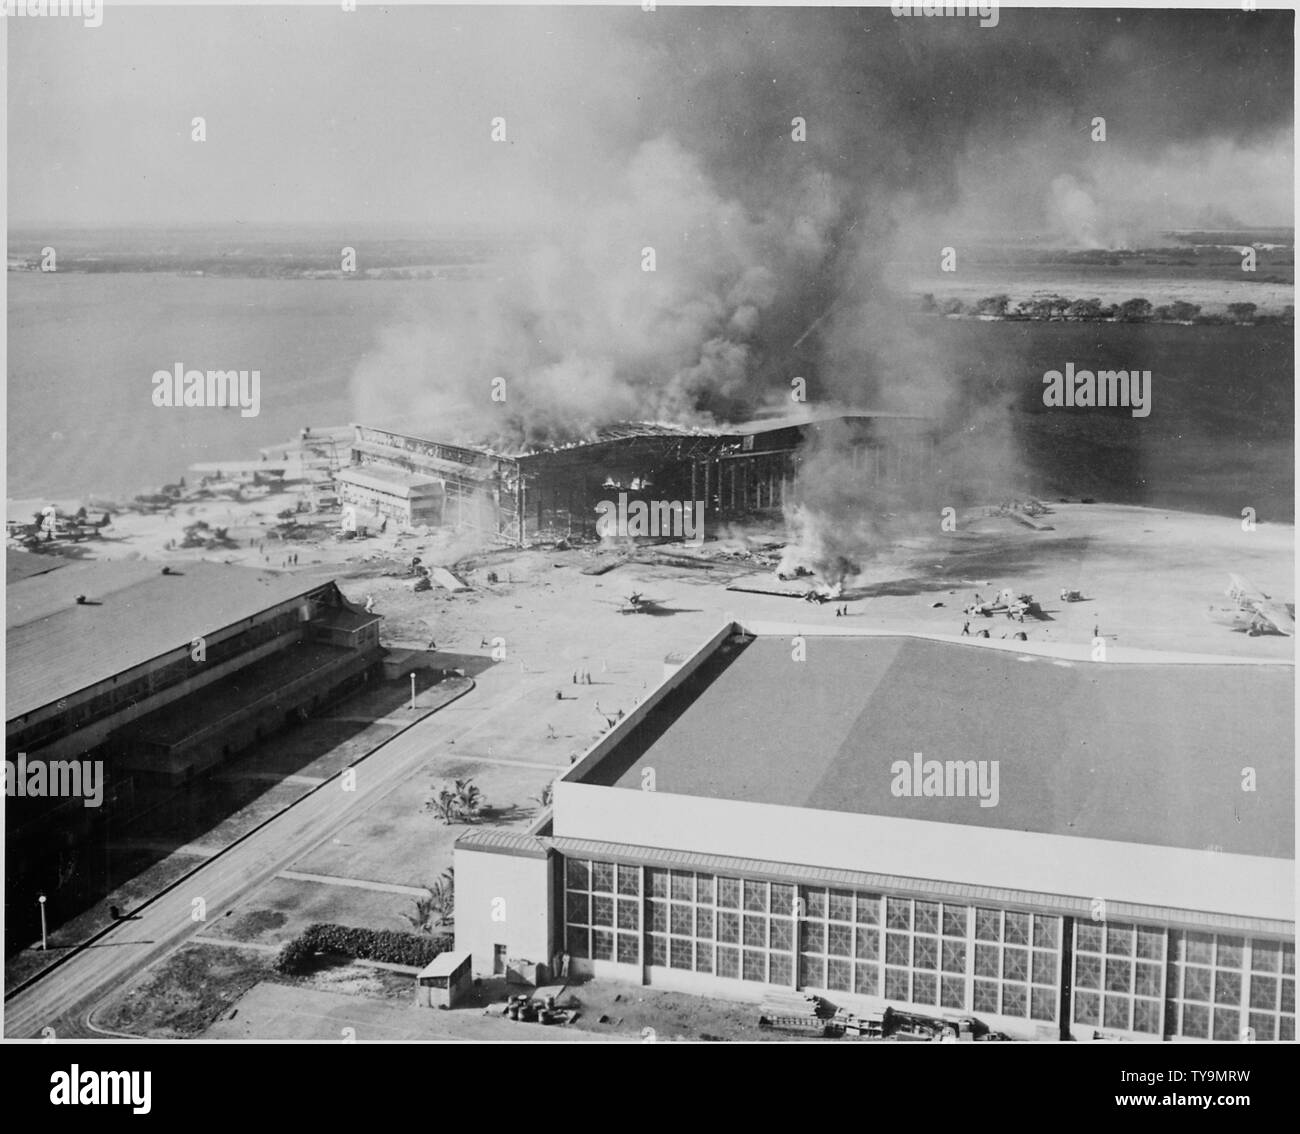 Naval photograph documenting the Japanese attack on Pearl Harbor, Hawaii which initiated US participation in World War II. Navy's caption: Burning barracks at Ford Island, Pearl Harbor, Hawaii, after being attacked by Japanese aircraft on Dec.7, 1941.; Scope and content:  This photograph was originally taken by a Naval photographer immediately after the Japanese attack on Pearl Harbor, but came to be filed in a writ of application for habeas corpus case (number 298) tried in the US District Court, District of Hawaii in 1944. The case, In Re Lloyd C. Duncan related to imposition of martial law Stock Photo